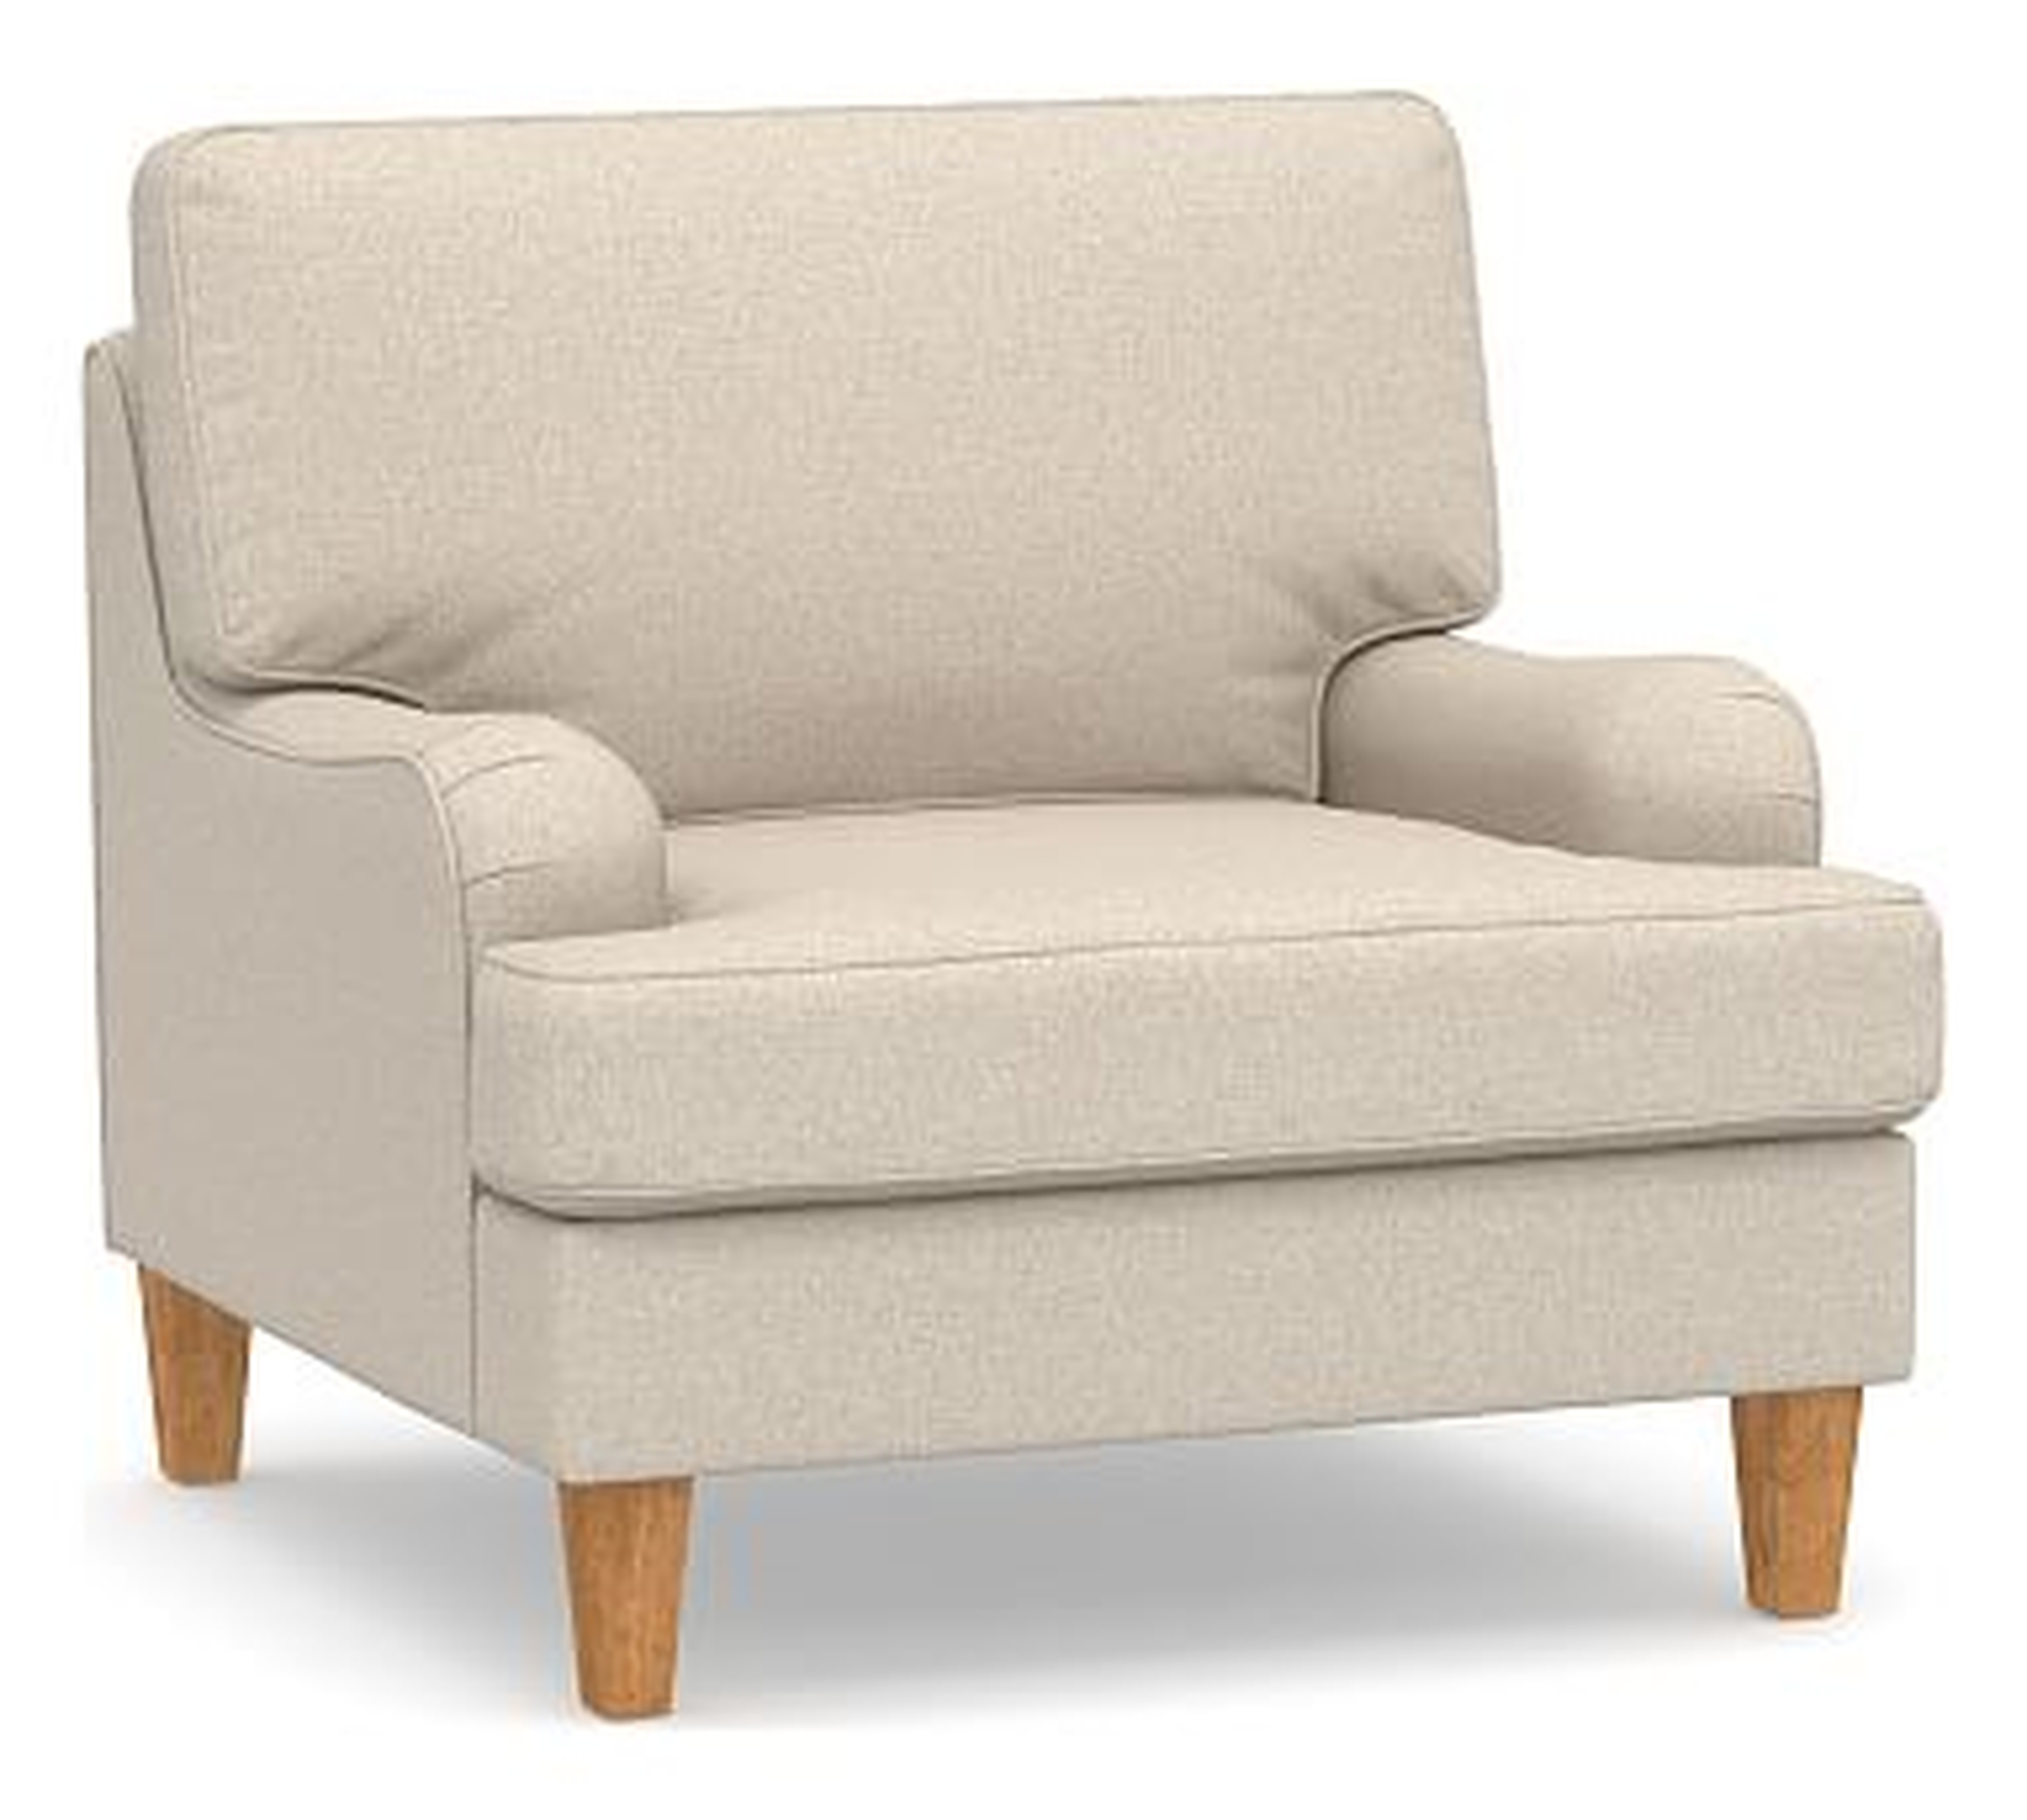 SoMa Hawthorne English Upholstered Armchair, Polyester Wrapped Cushions, Textured Twill Khaki - Pottery Barn